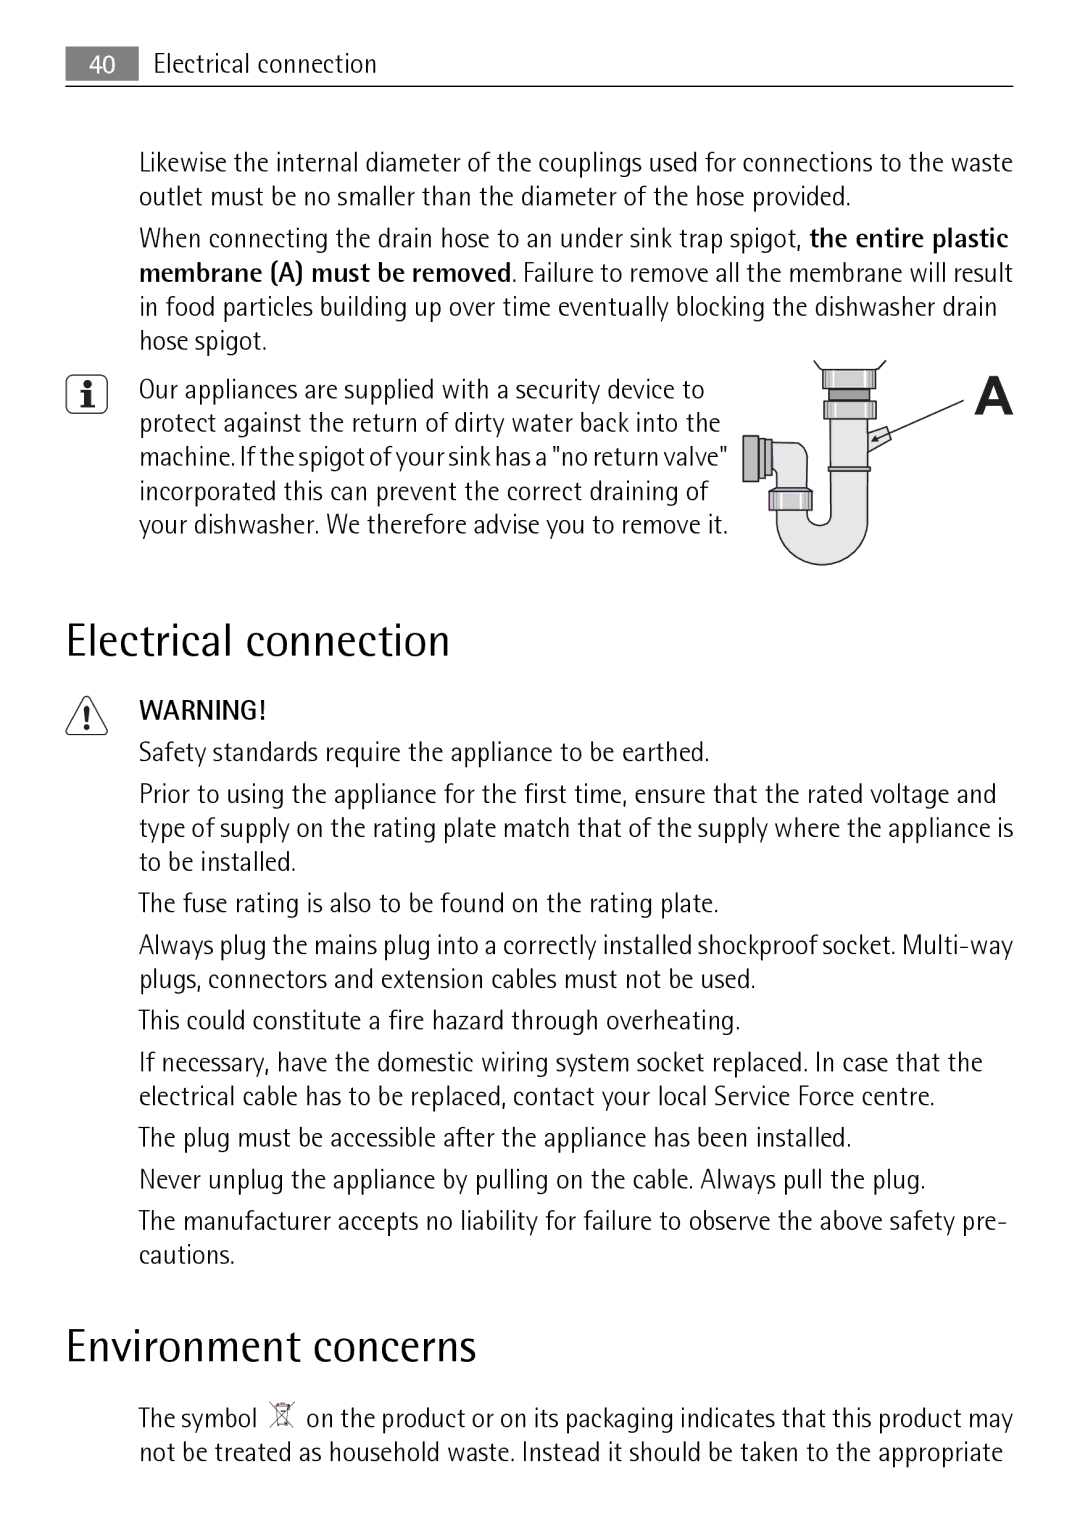 Electrolux FAVORIT 88010 user manual Electrical connection, Environment concerns 